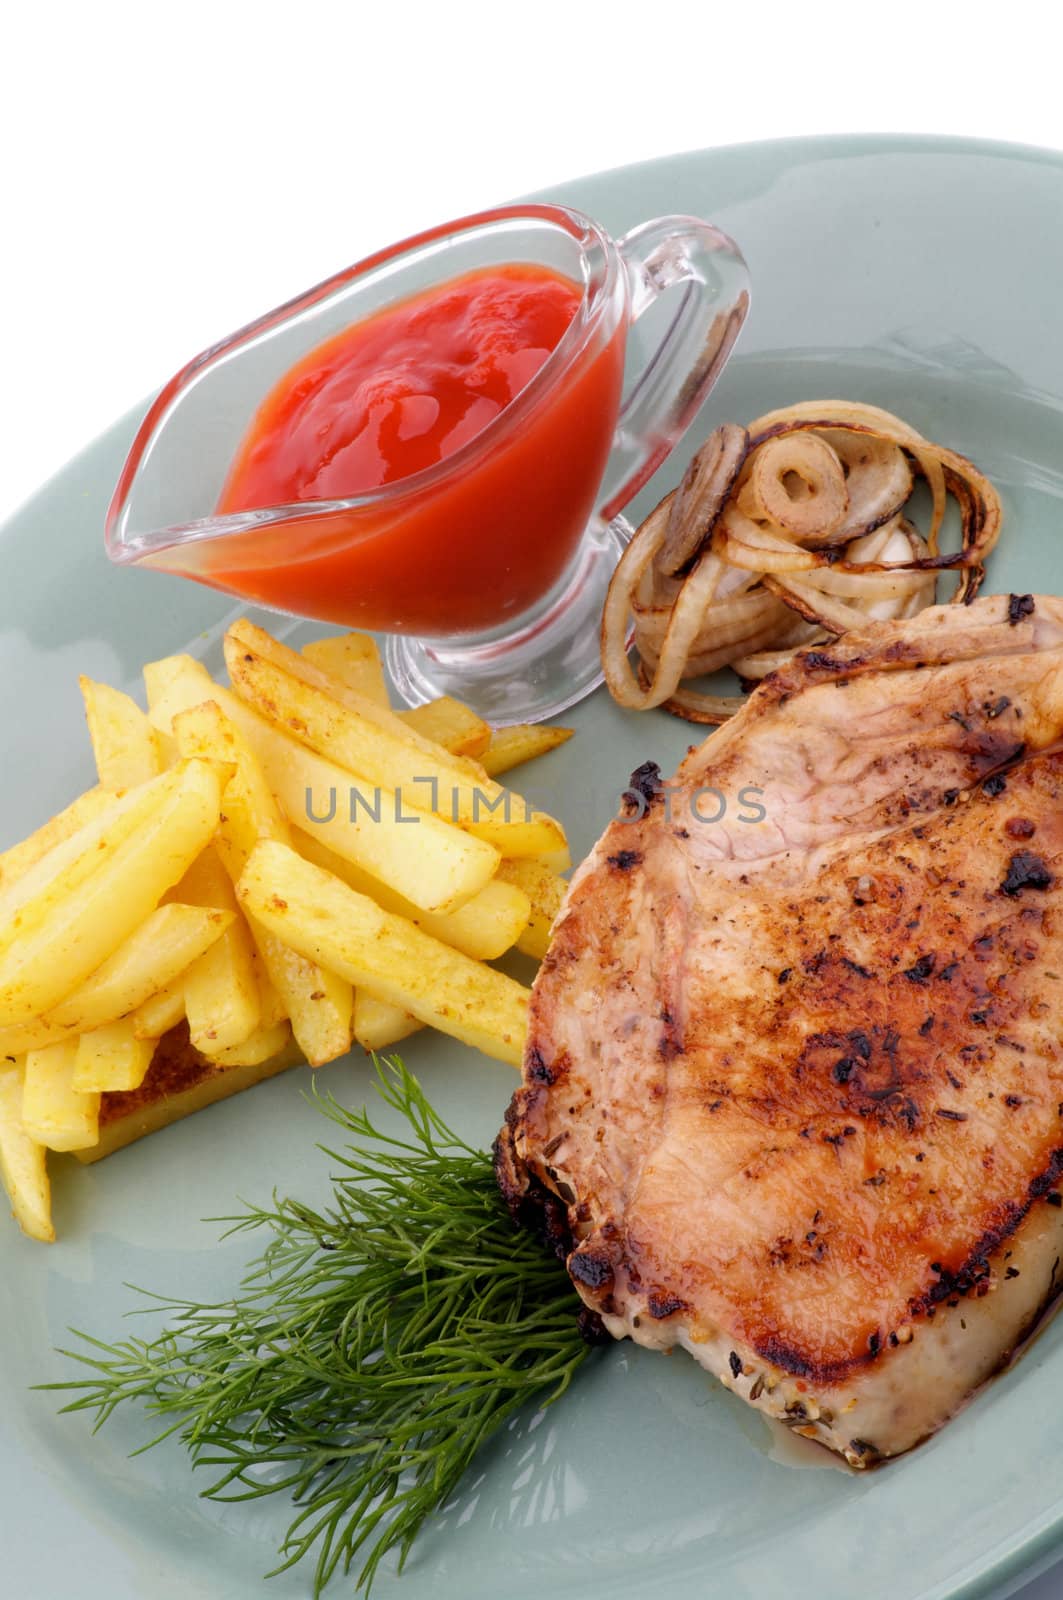 Pork Steak, French Fries and Grilled Onions by zhekos